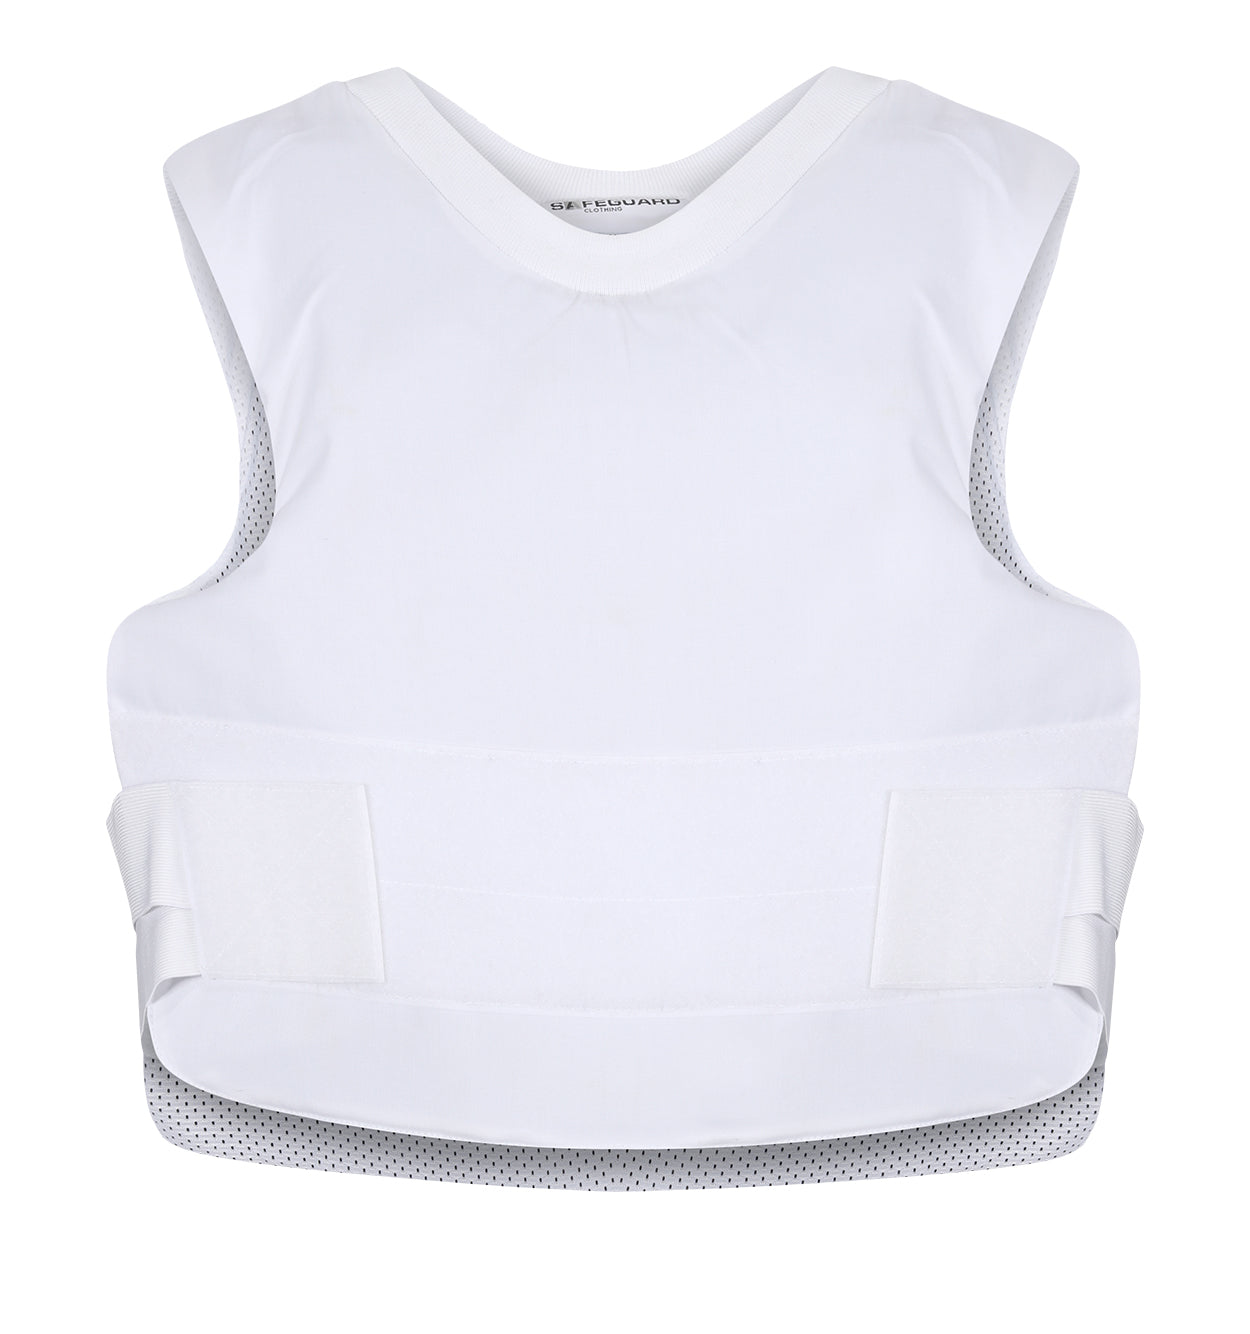 Bullet and stab-resistant vest | NIJ 3A | ProtectionGroup